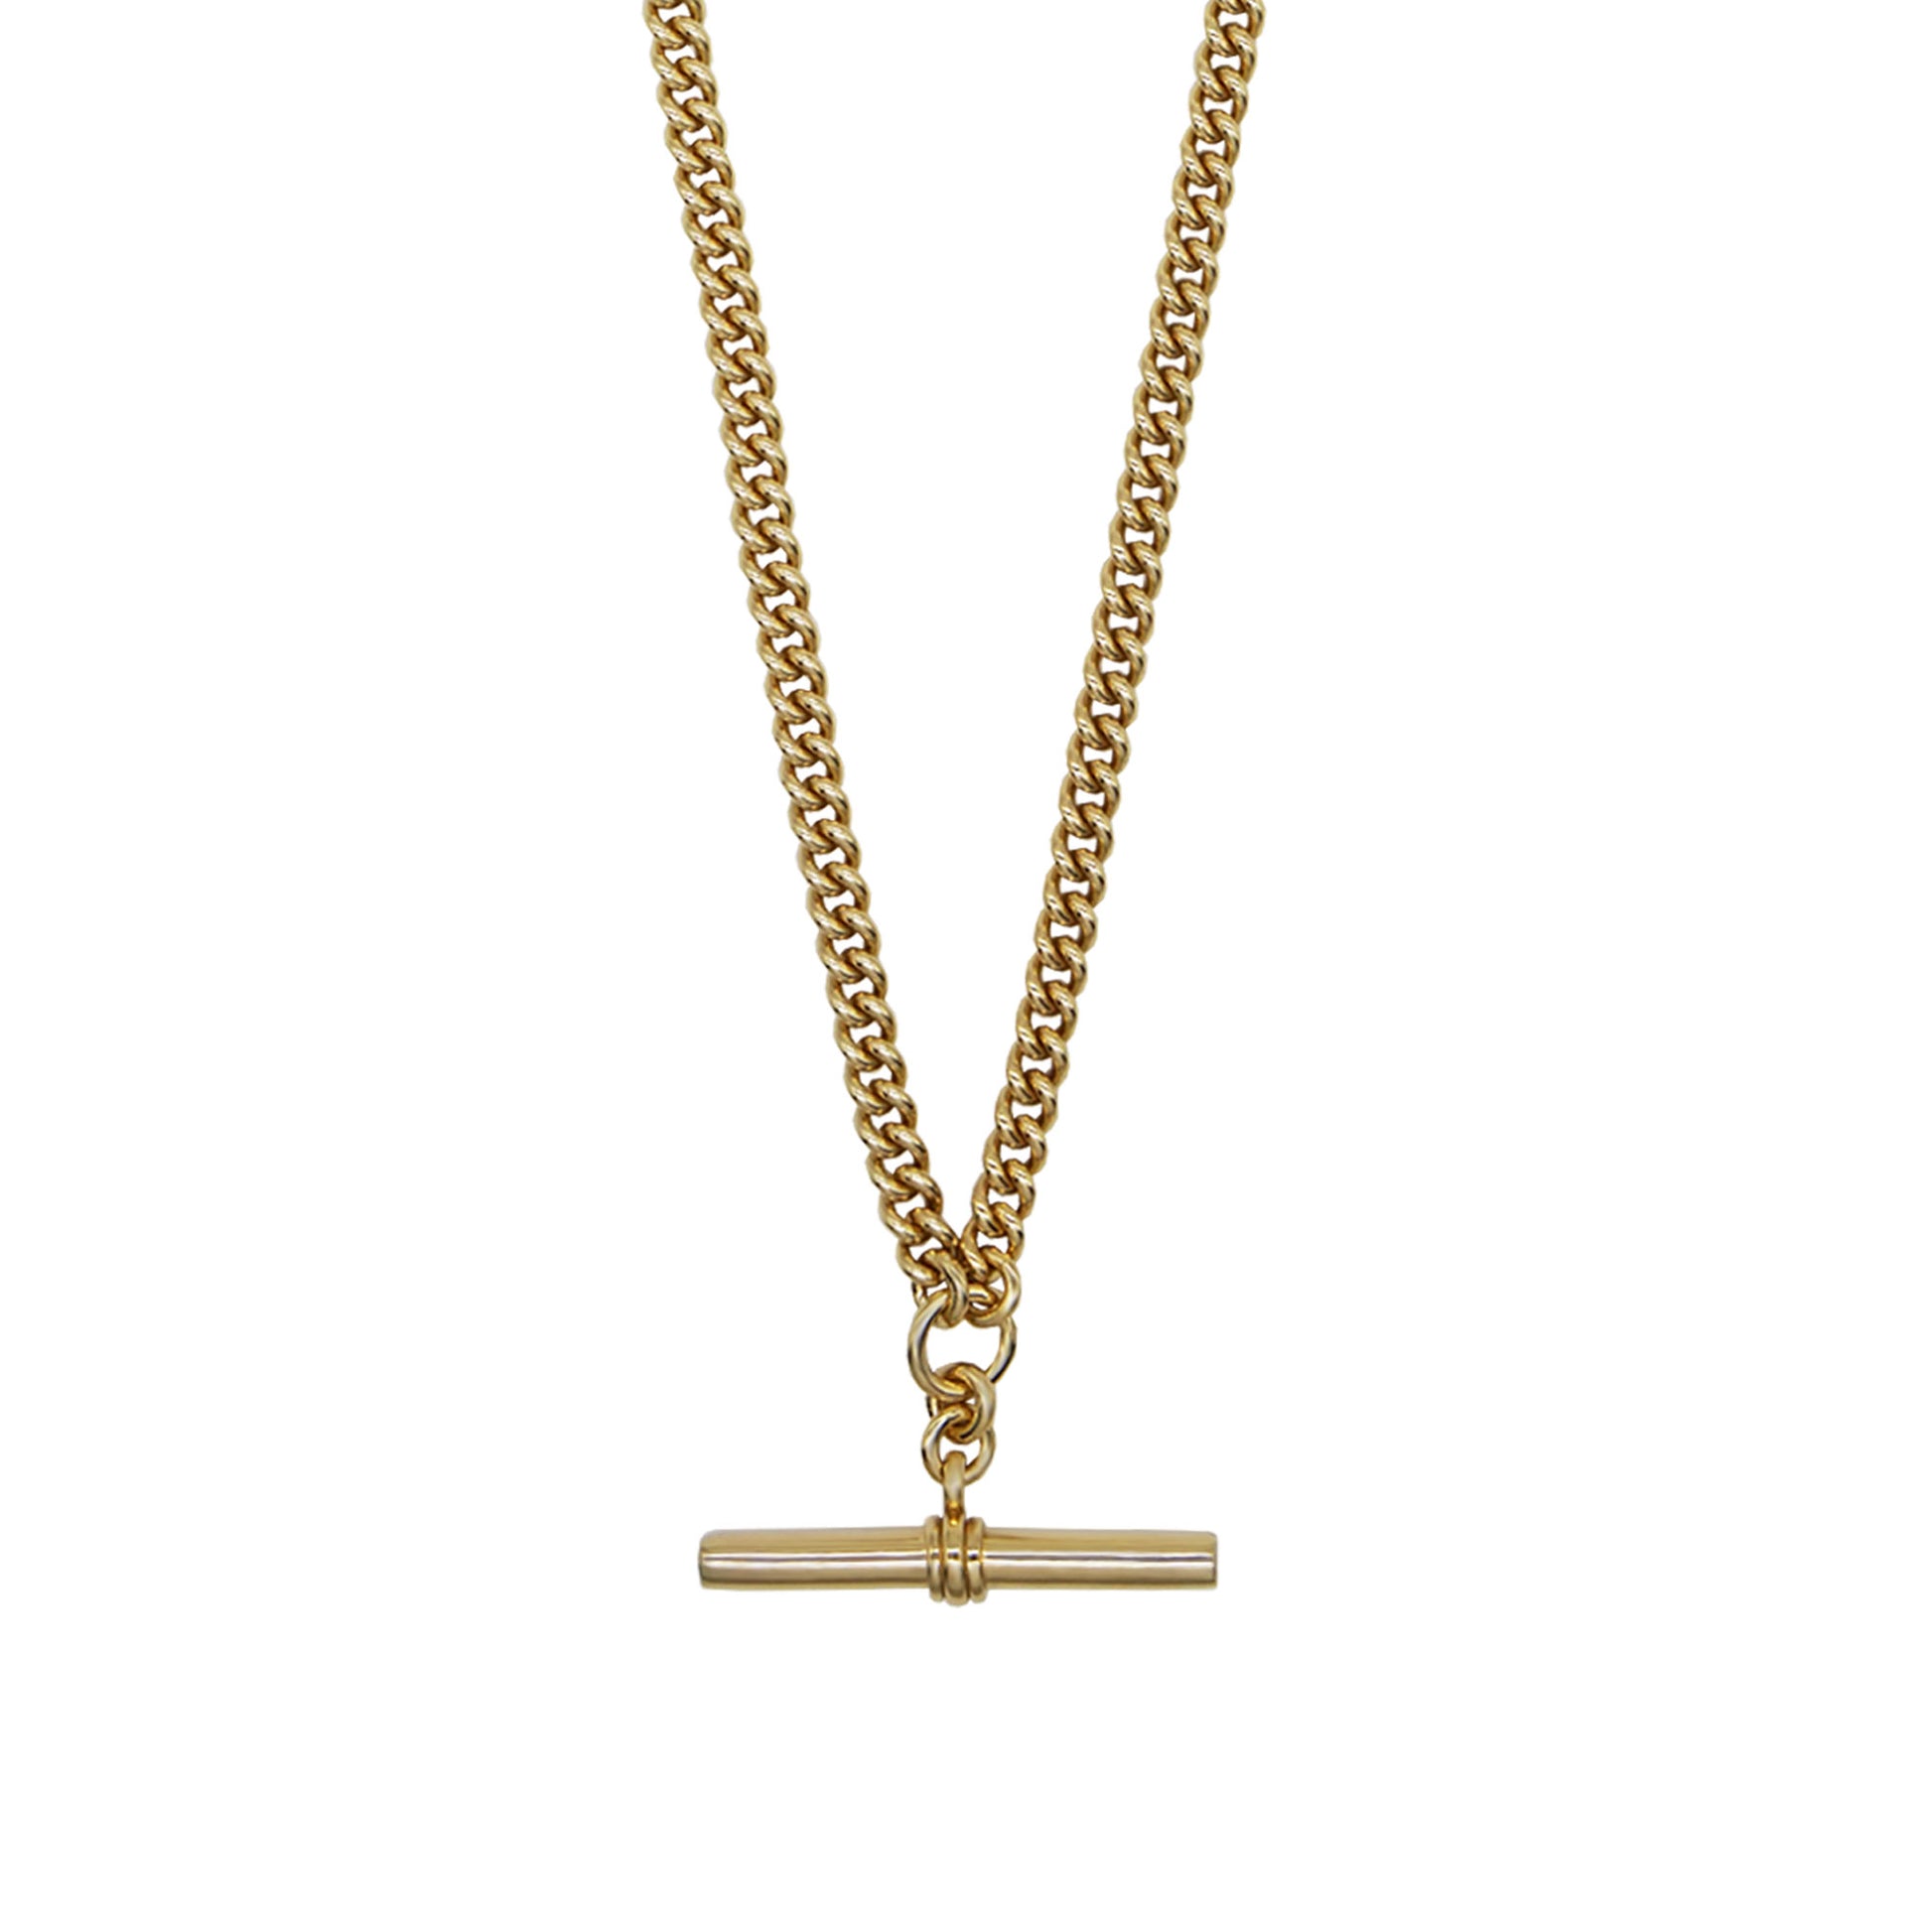 Close up of Pawnshop gold plated sterling silver T bar necklace. Curb chain detail with a T bar charm feature.